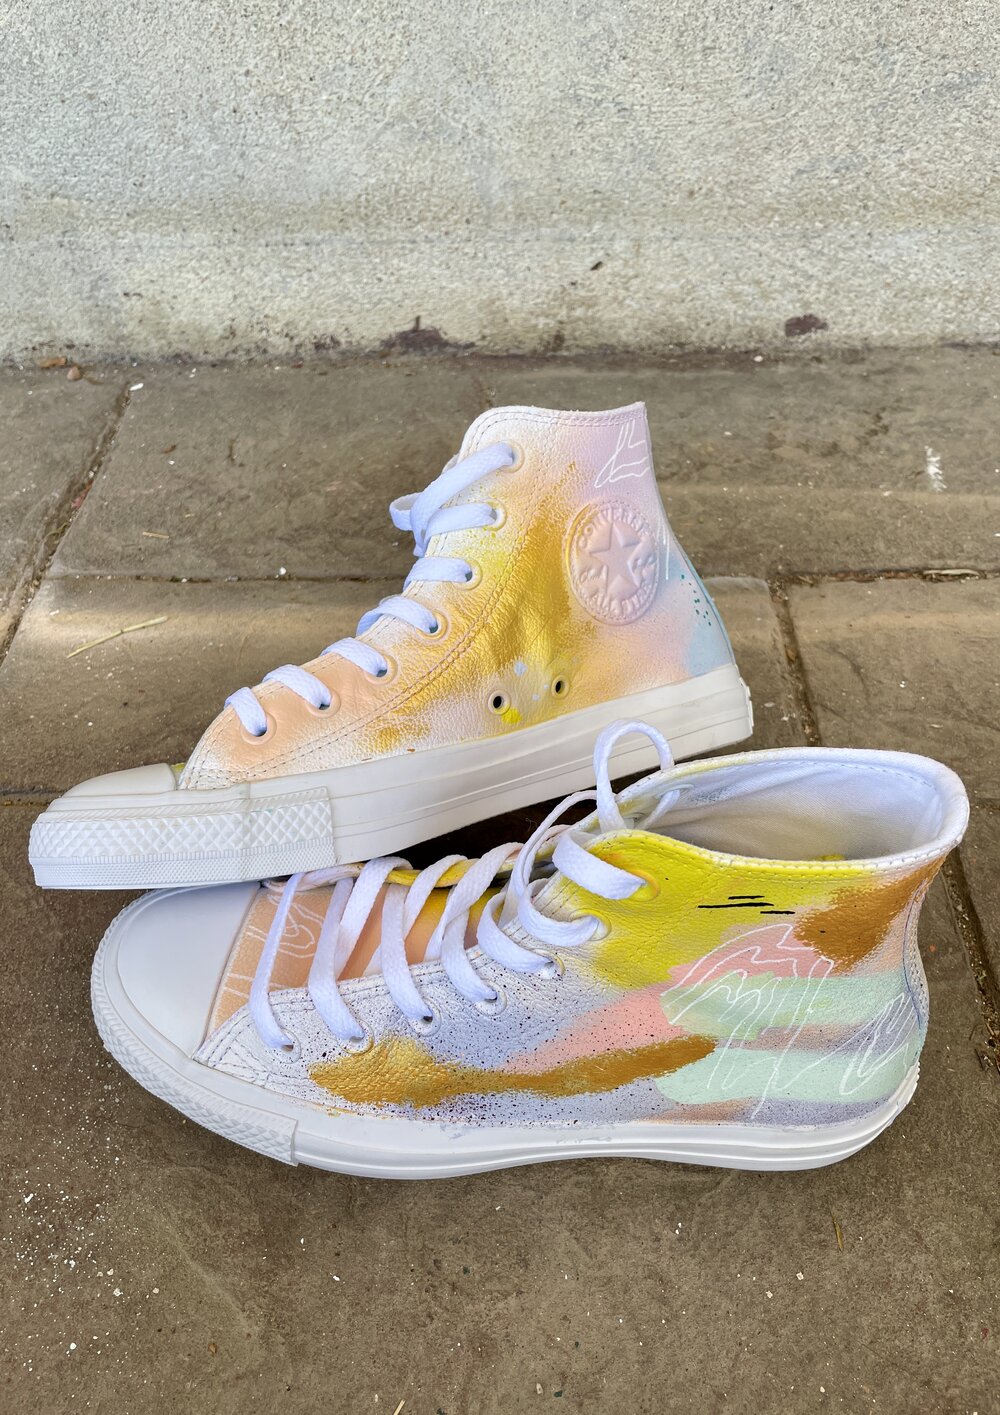 Made Sneakers! Courtney Griffin Fine Art